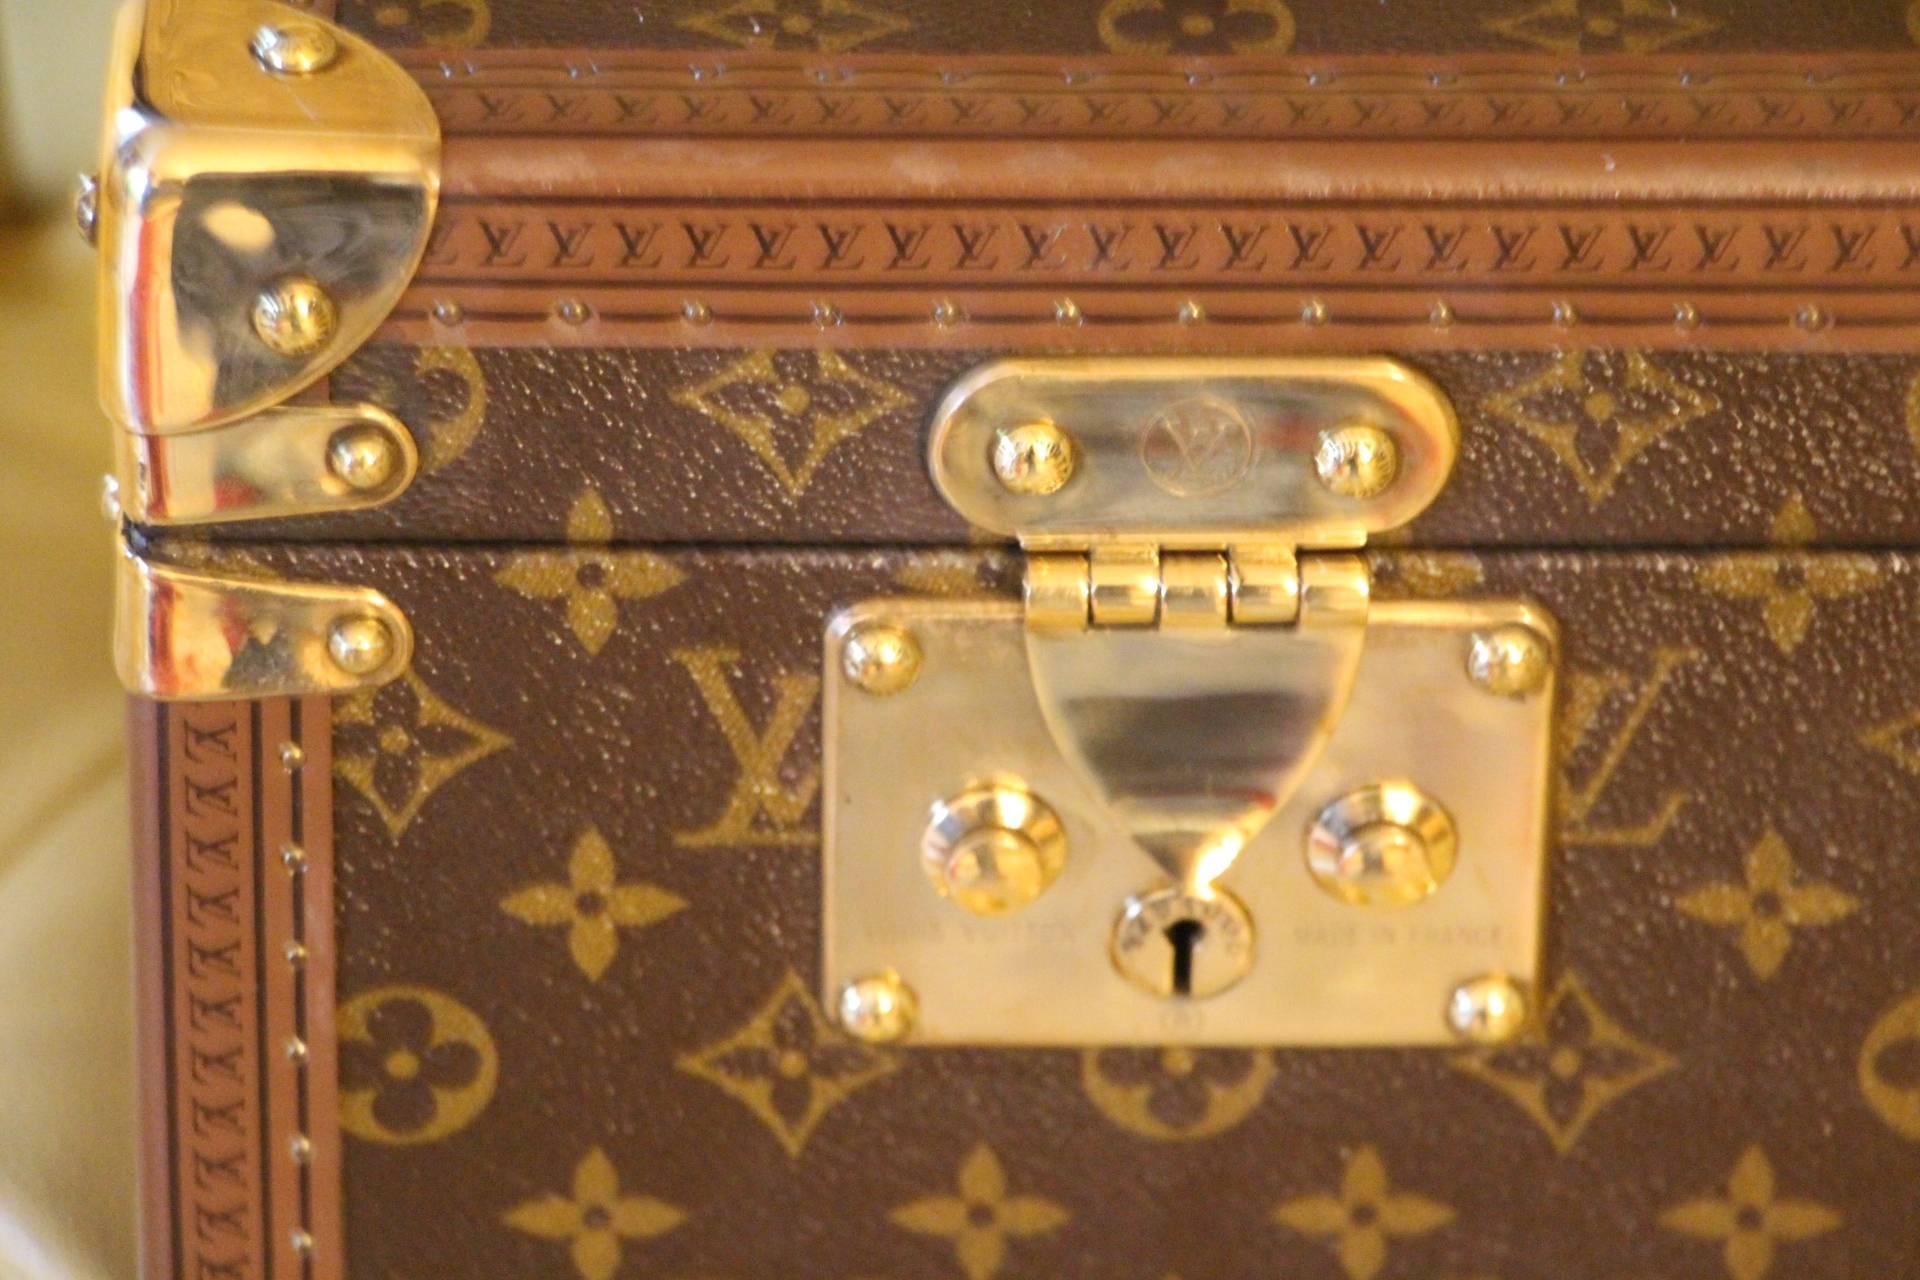 Louis Vuitton monogram train case with solid brass corners and lock.

Leather top handle.
All its studs are engraved Louis Vuitton. Louis Vuitton printed trim.

Its interior is in good condition, fitted with leather strap. Louis Vuitton serial